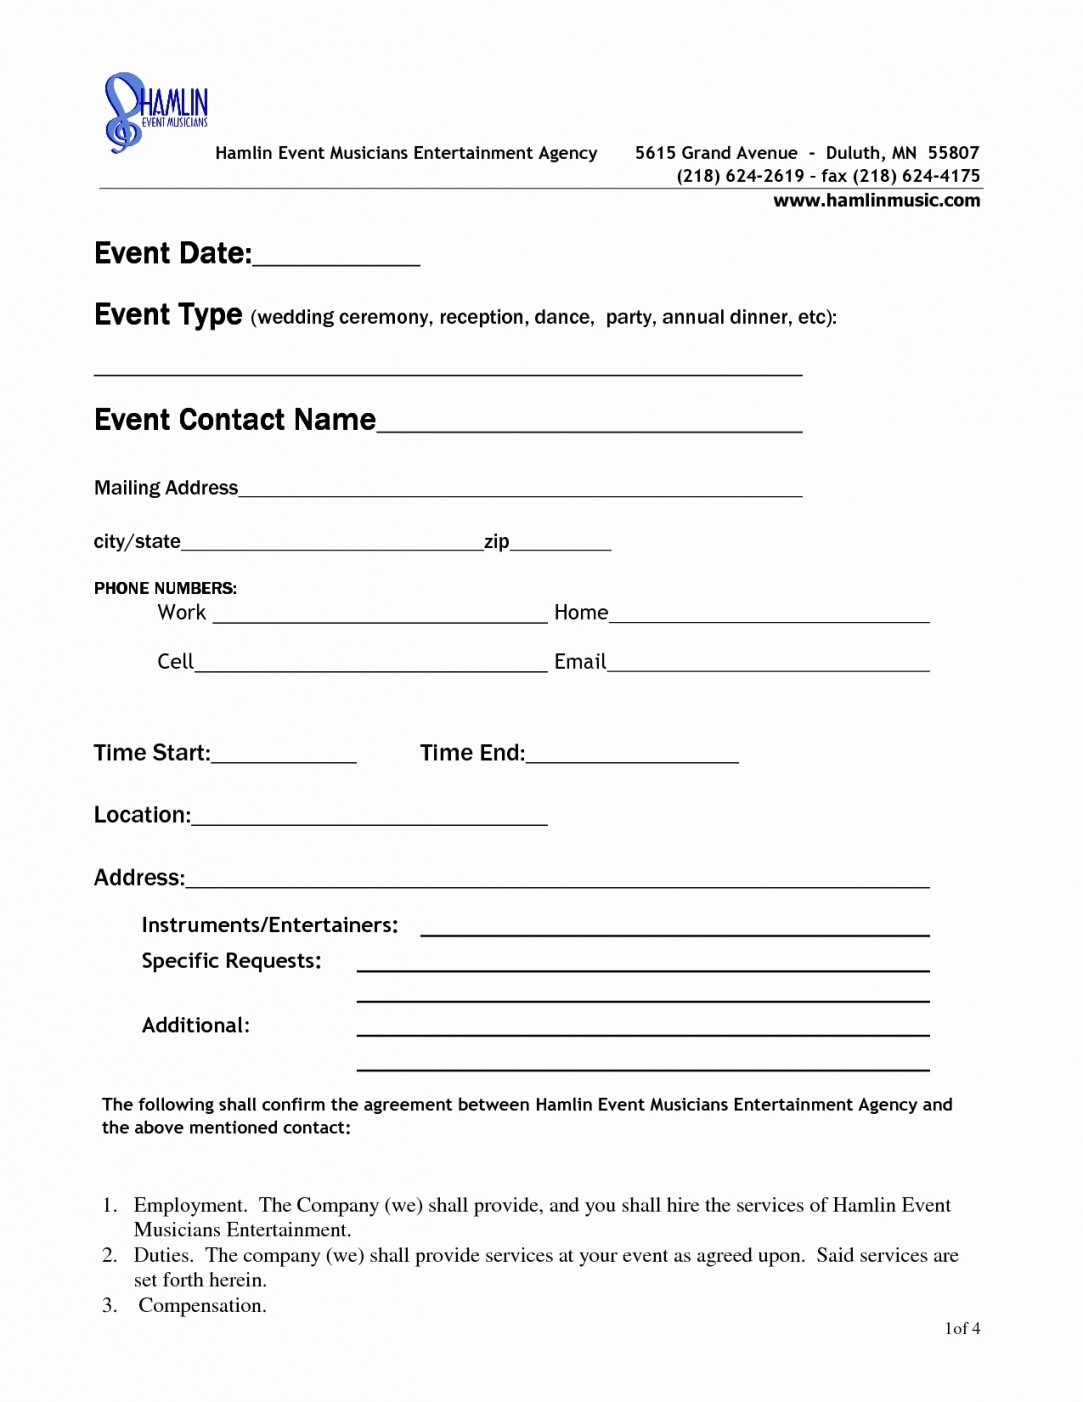 Event Space Rental Agreement Template Lostranquillos Document Venue Contract